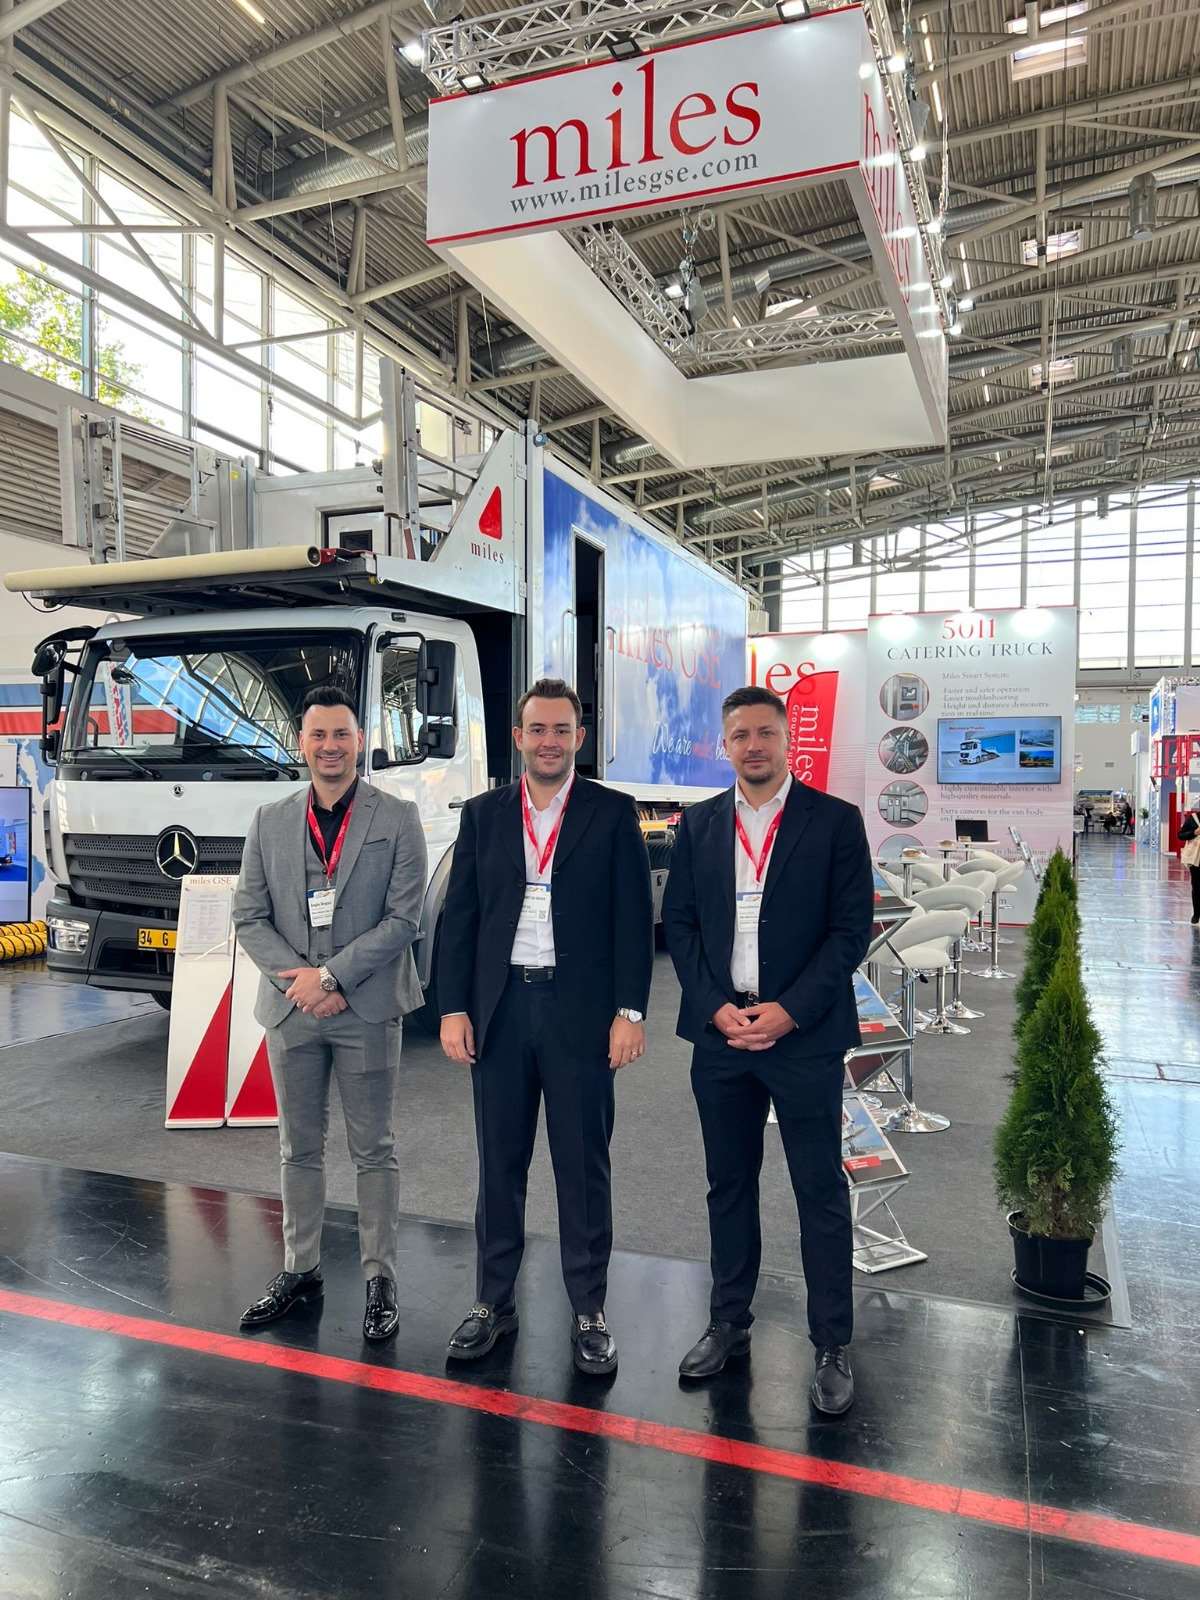 Miles is at Inter Airport Europe!, Miles GSE participated in the Inter Airport 2023 fair held in the city of Munich, Germany, from October 10 to October 13, 2023.